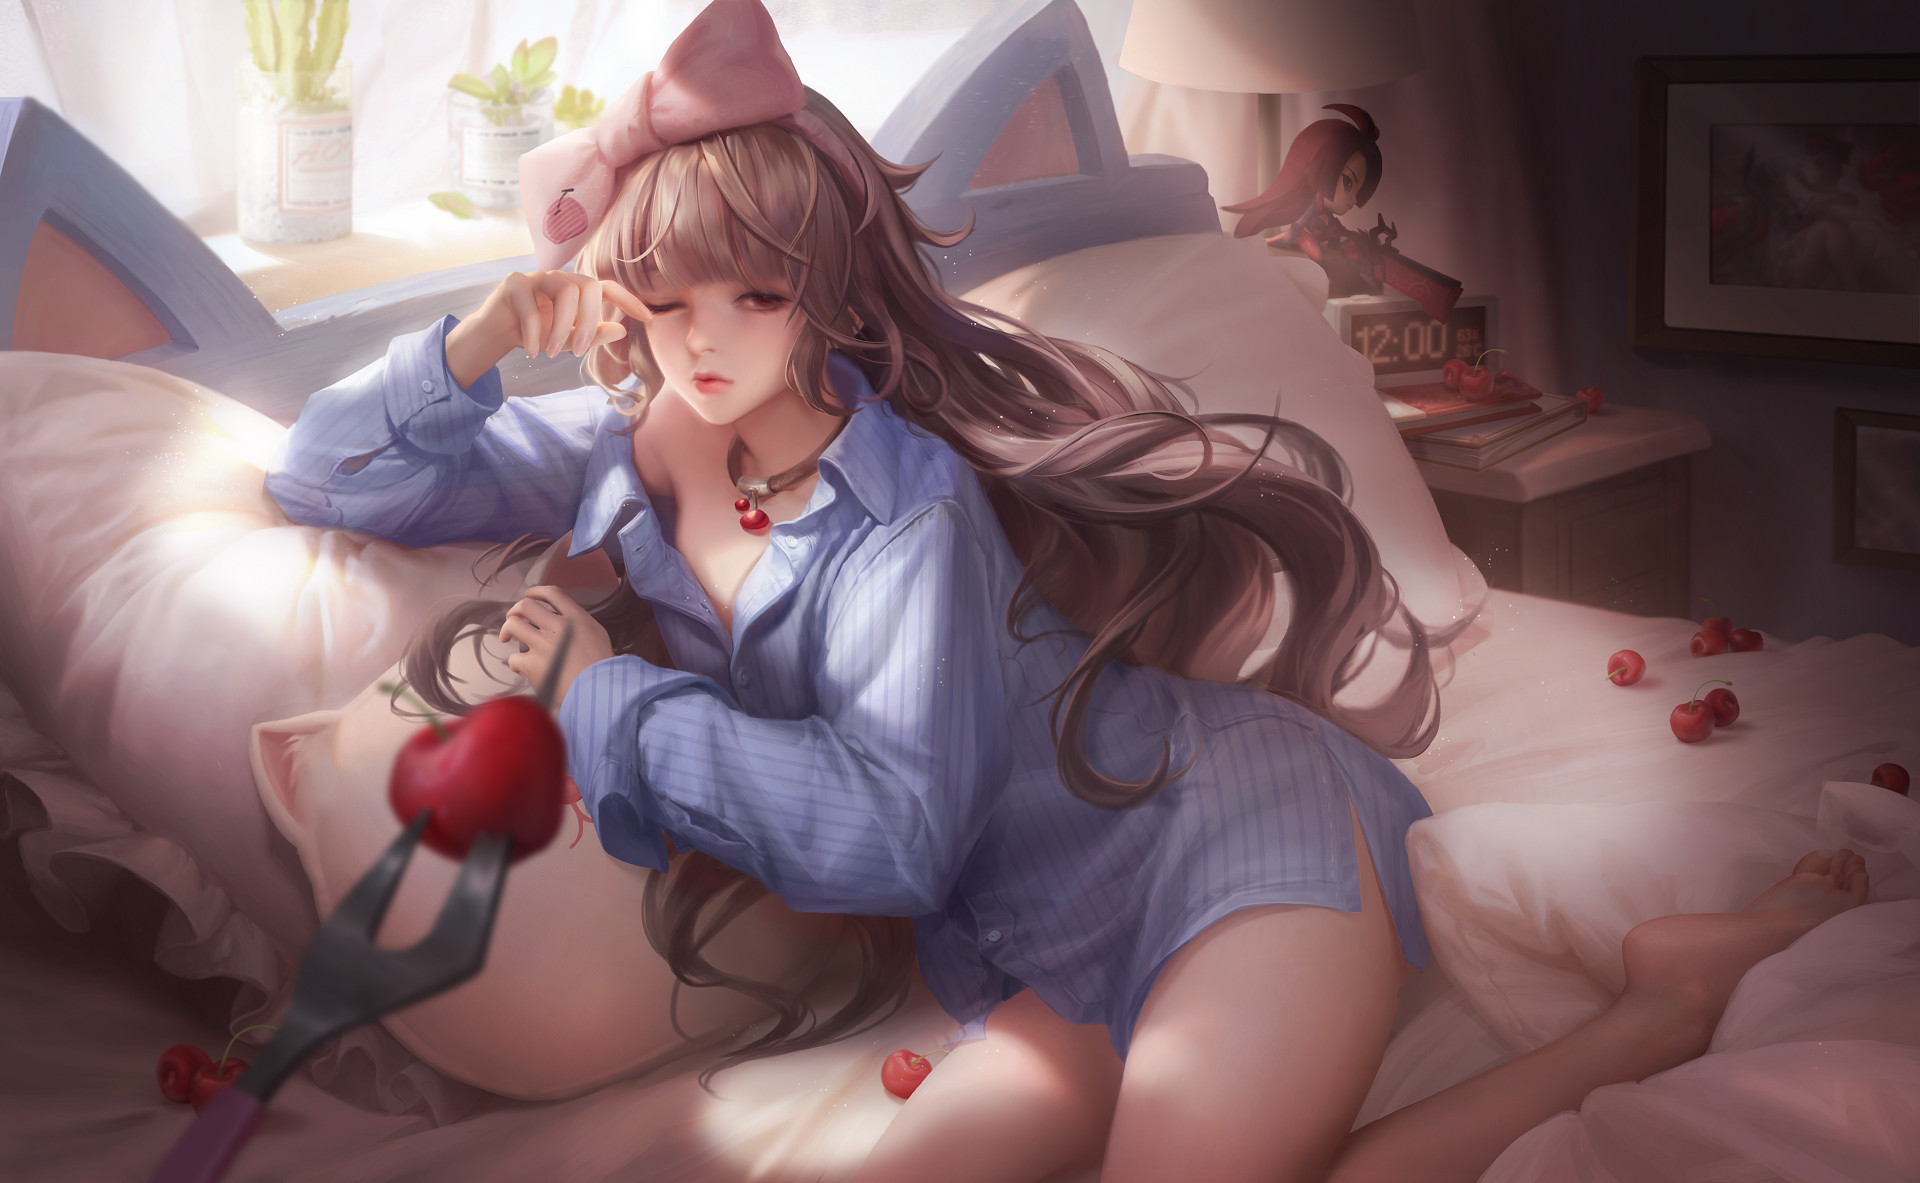 Anime 1920x1183 Arena of Valor video games video game art video game girls video game characters collar cherries one eye closed sleepy bed pillow